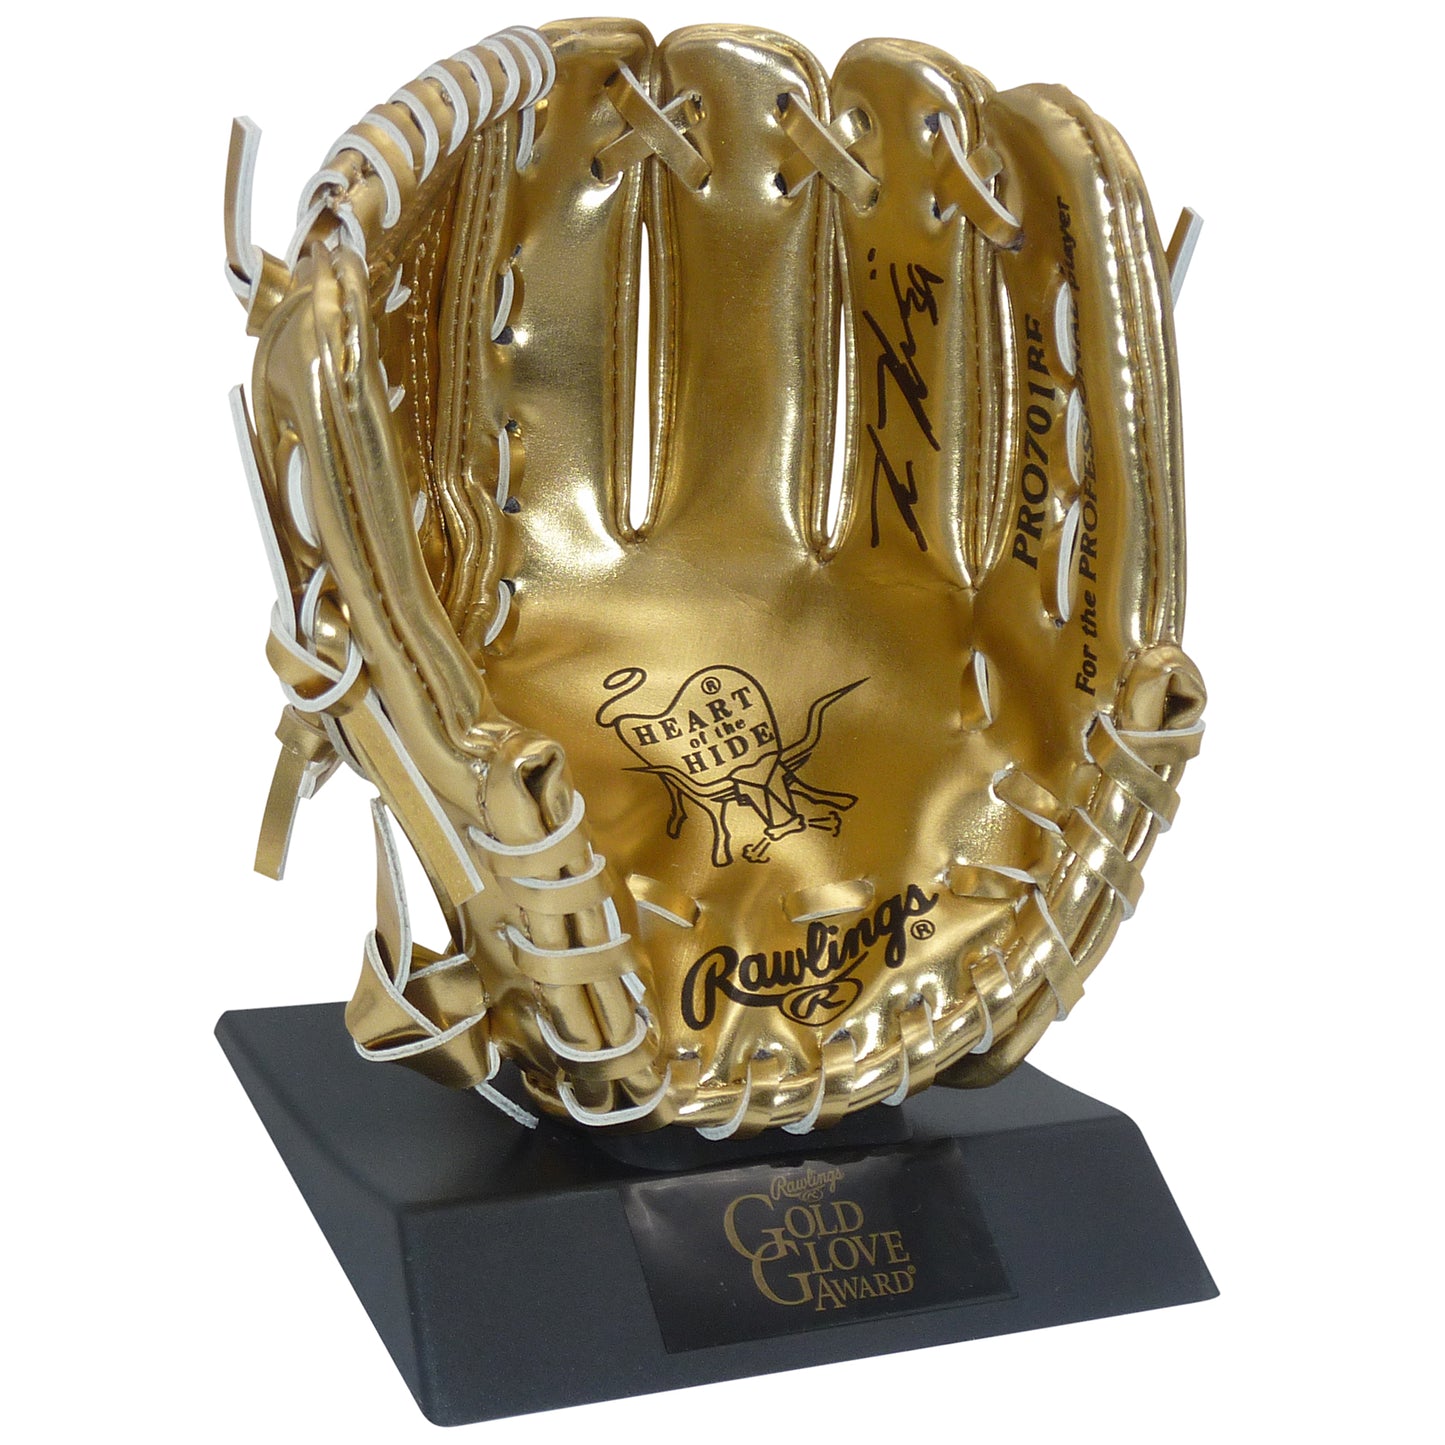 Kevin Kiermaier Autographed Gold Glove Statue Trophy - Tampa Bay Rays - JSA